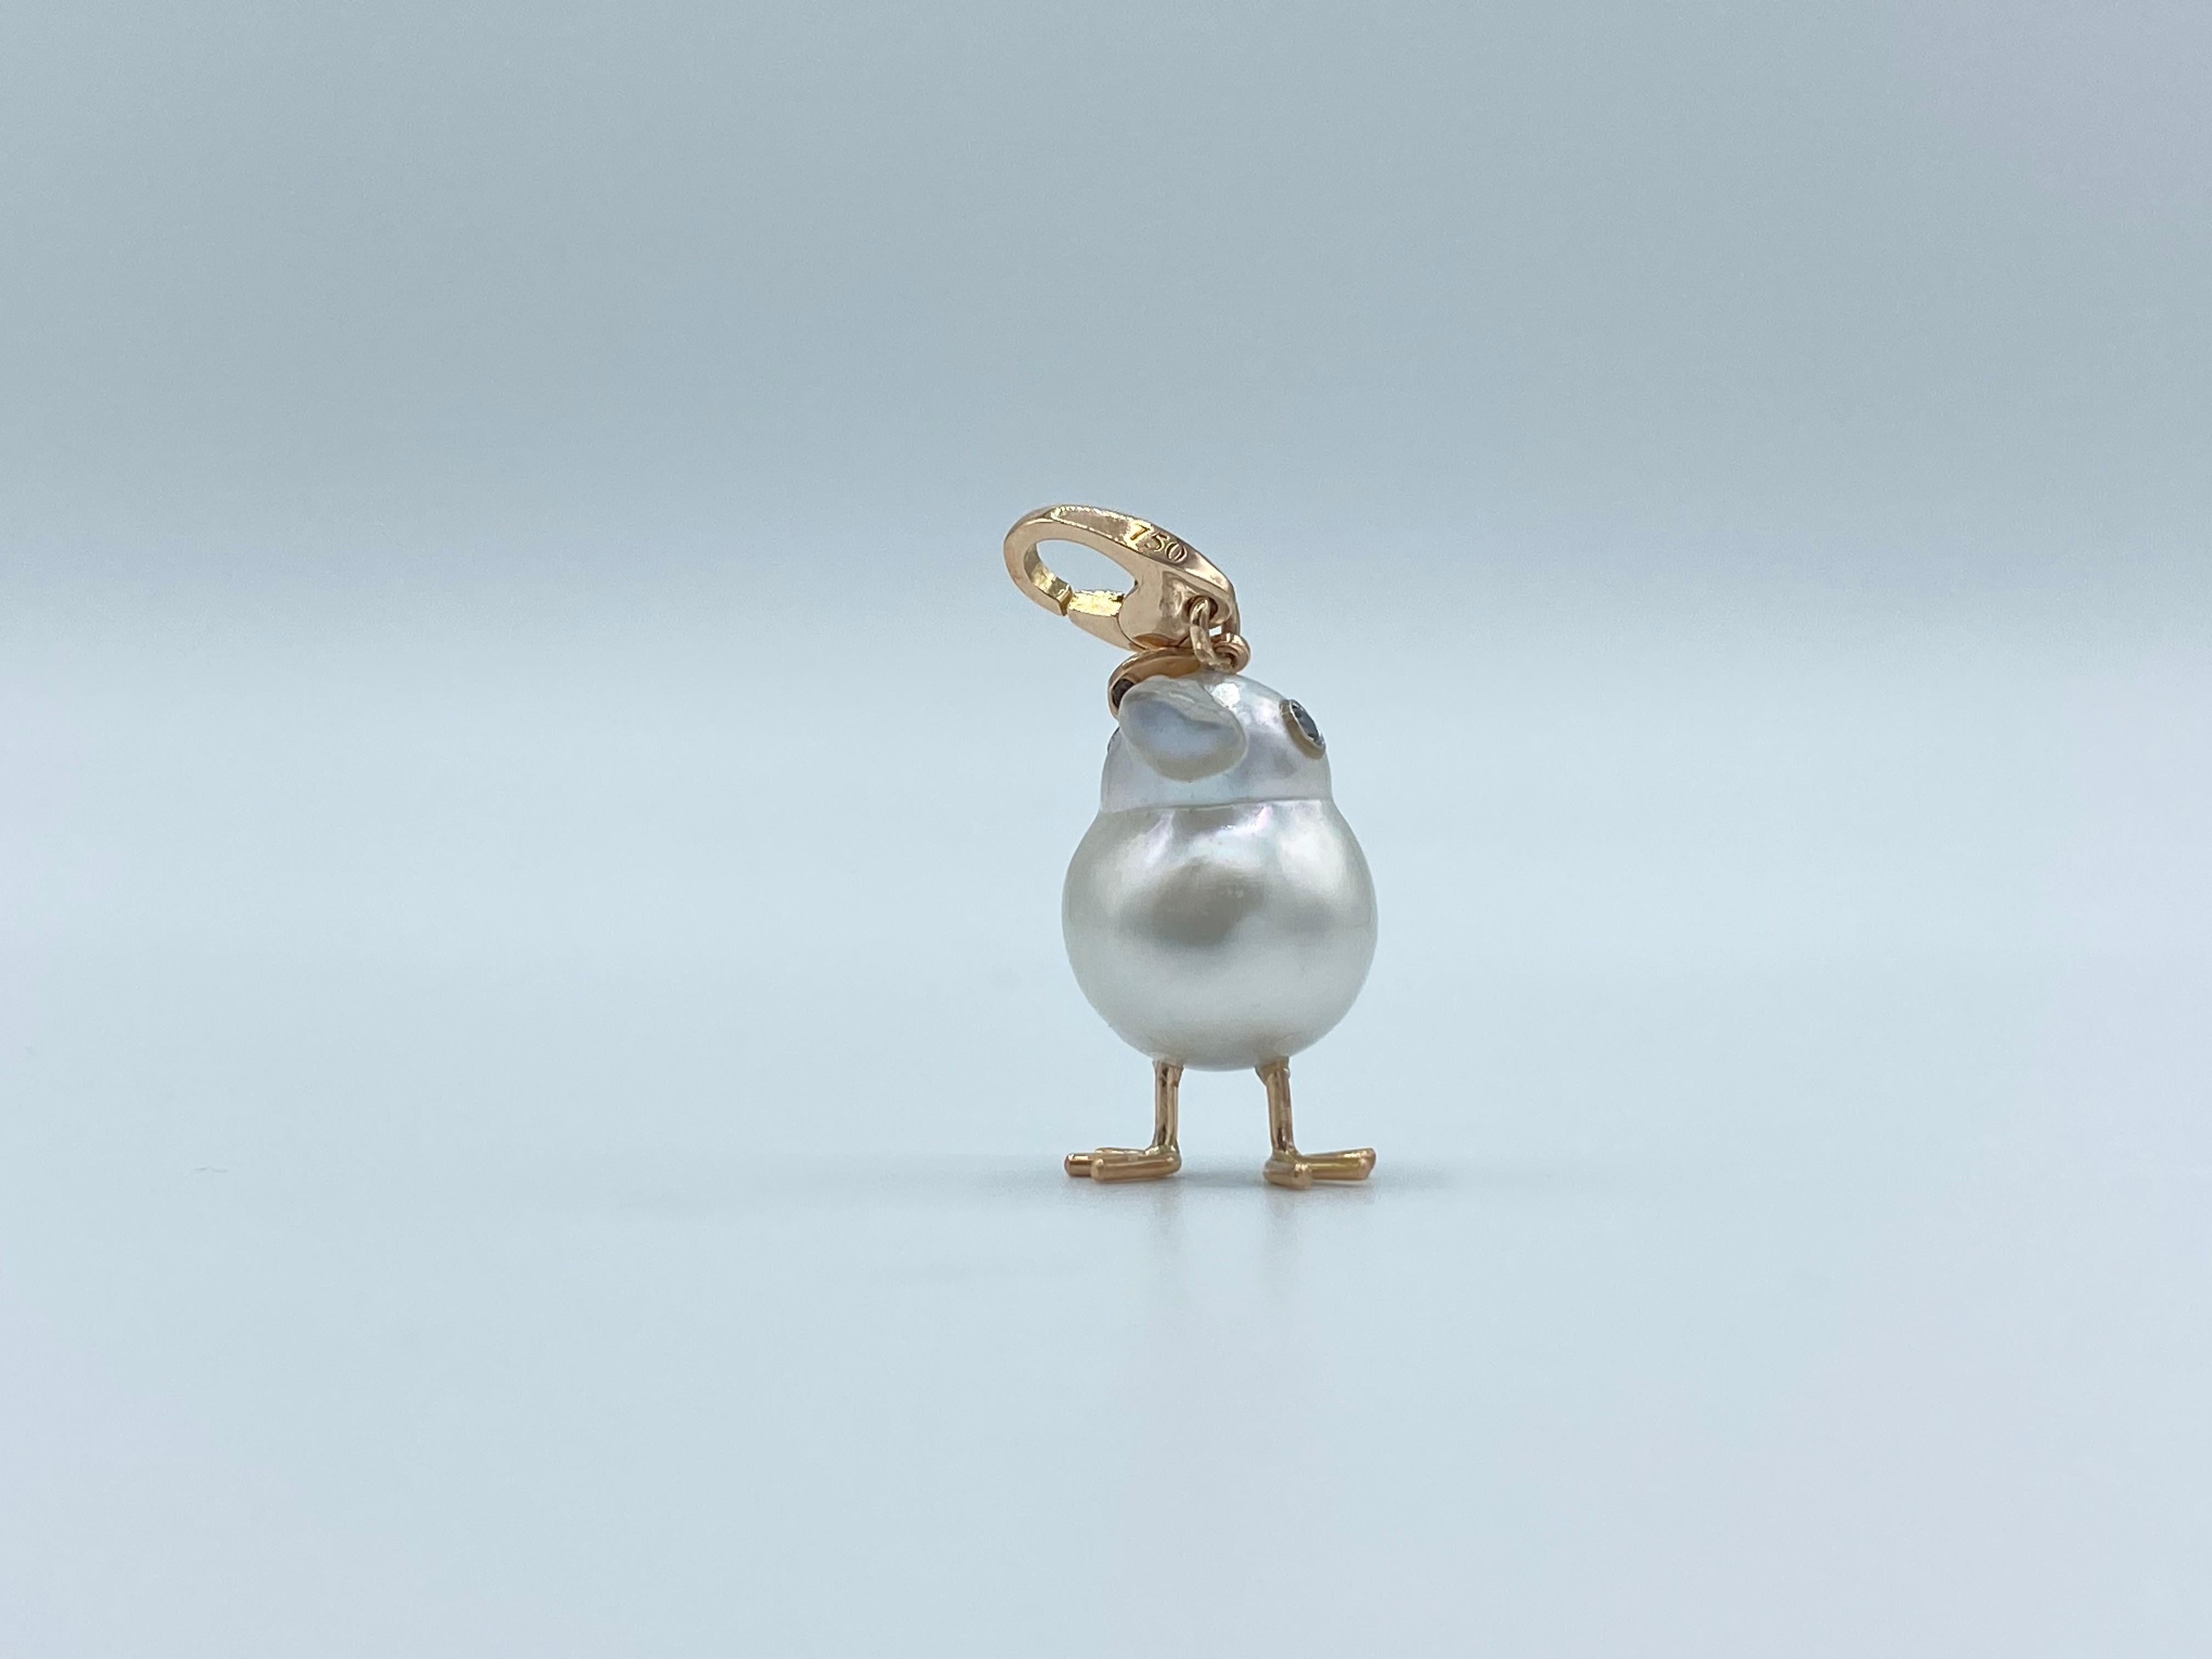 Chick Australian Pearl White Diamond 18Kt Red Gold Pendant Necklace or Charm 
A beautiful yellow Australian pearl has been carefully crafted to make a chick. He has his two legs, two eyes encrusted with two black diamonds. I didn't have to add the